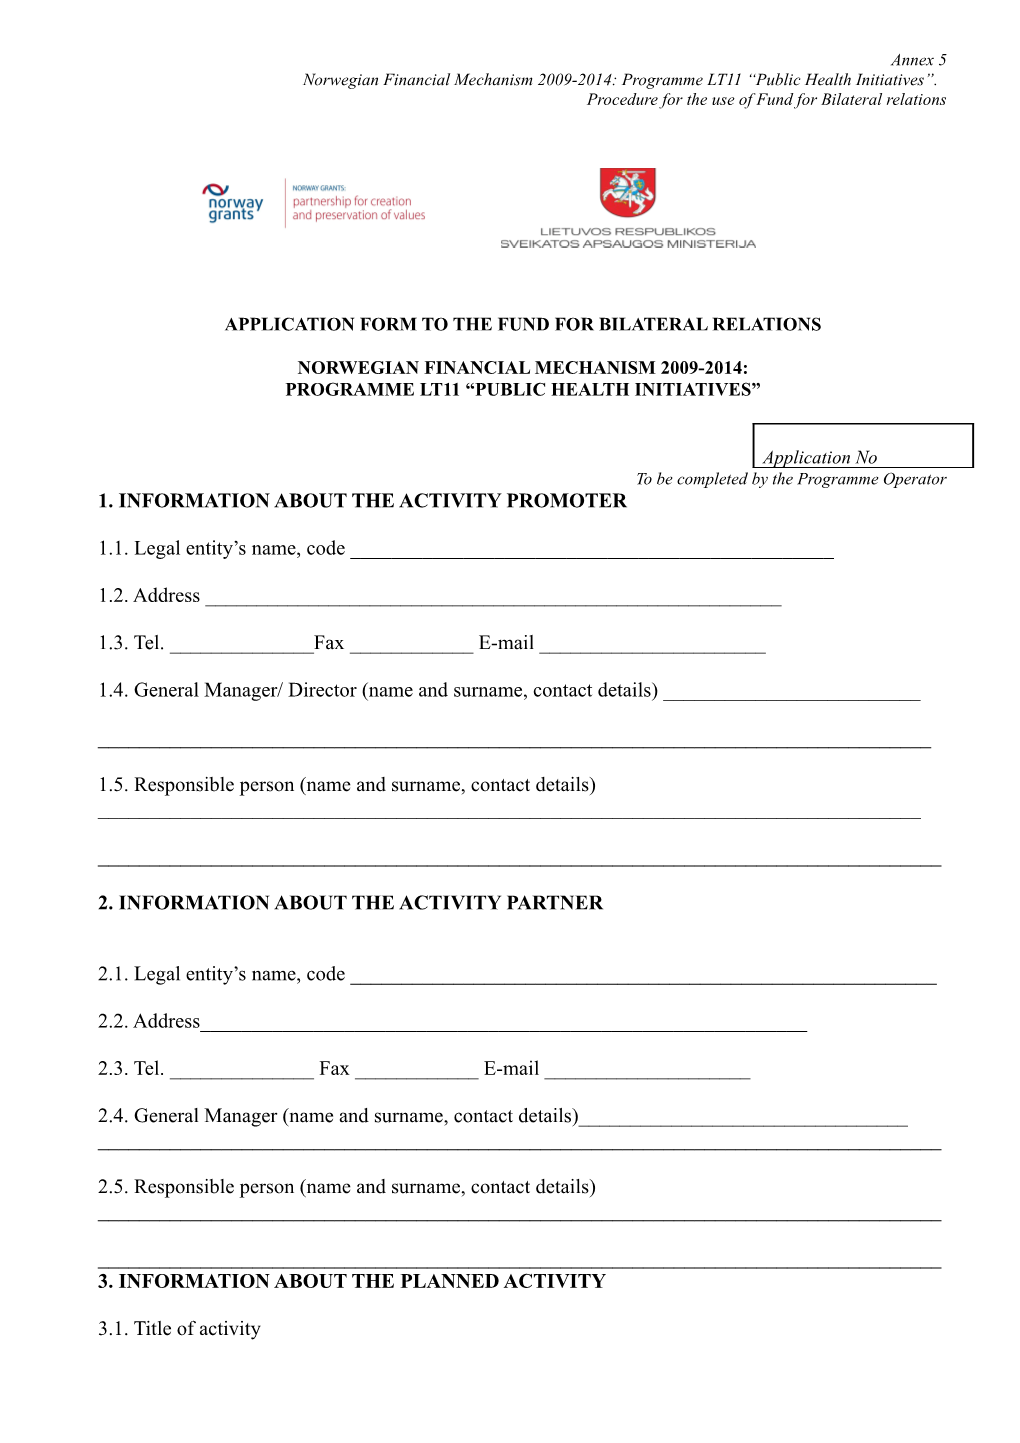 Application Form to the Fund for Bilateral Relations